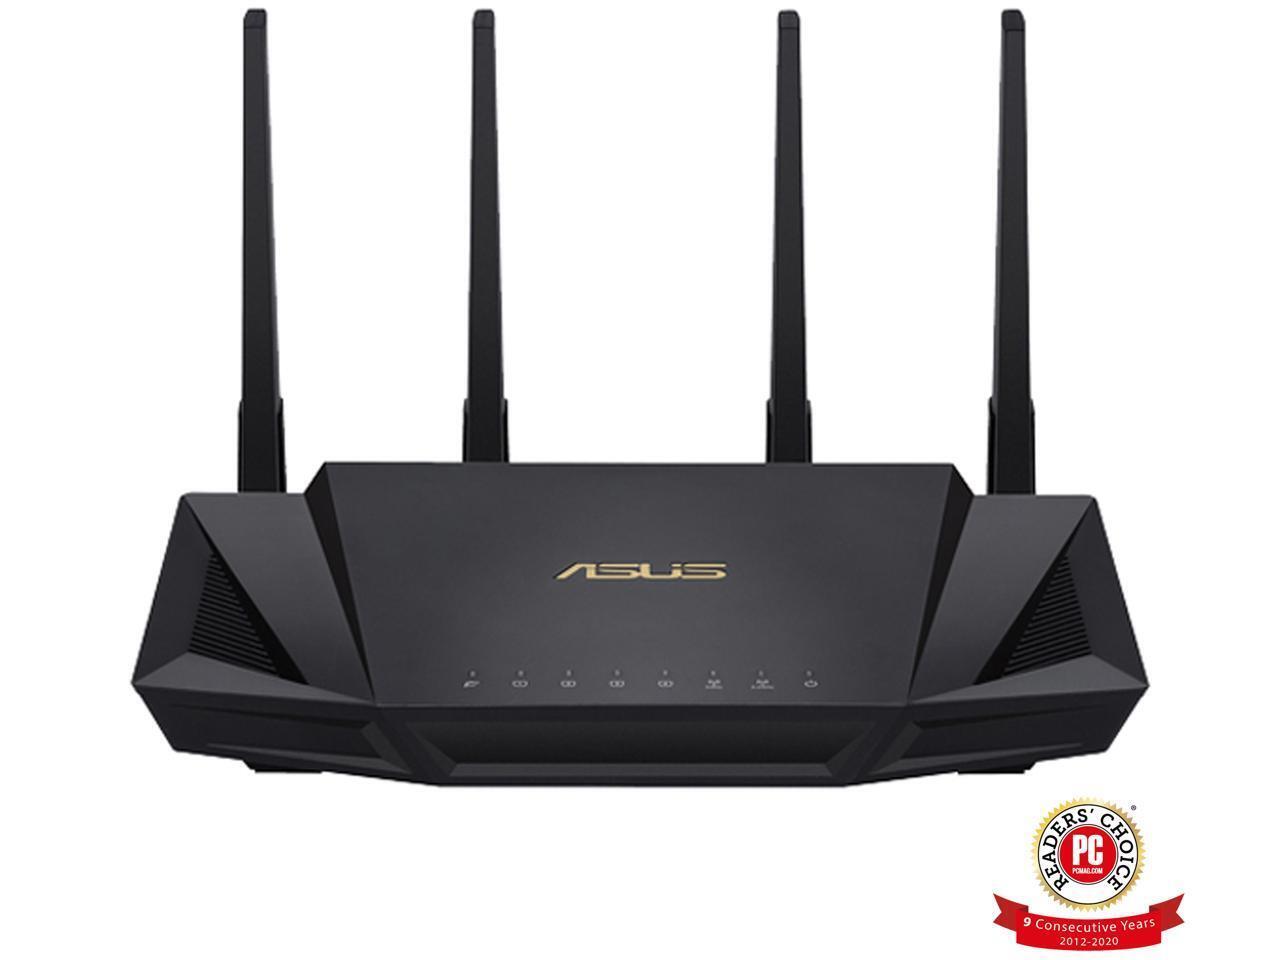 ASUS RT-AX3000 Dual Band WiFi Router, WiFi 6, 802.11ax, Lifetime Internet